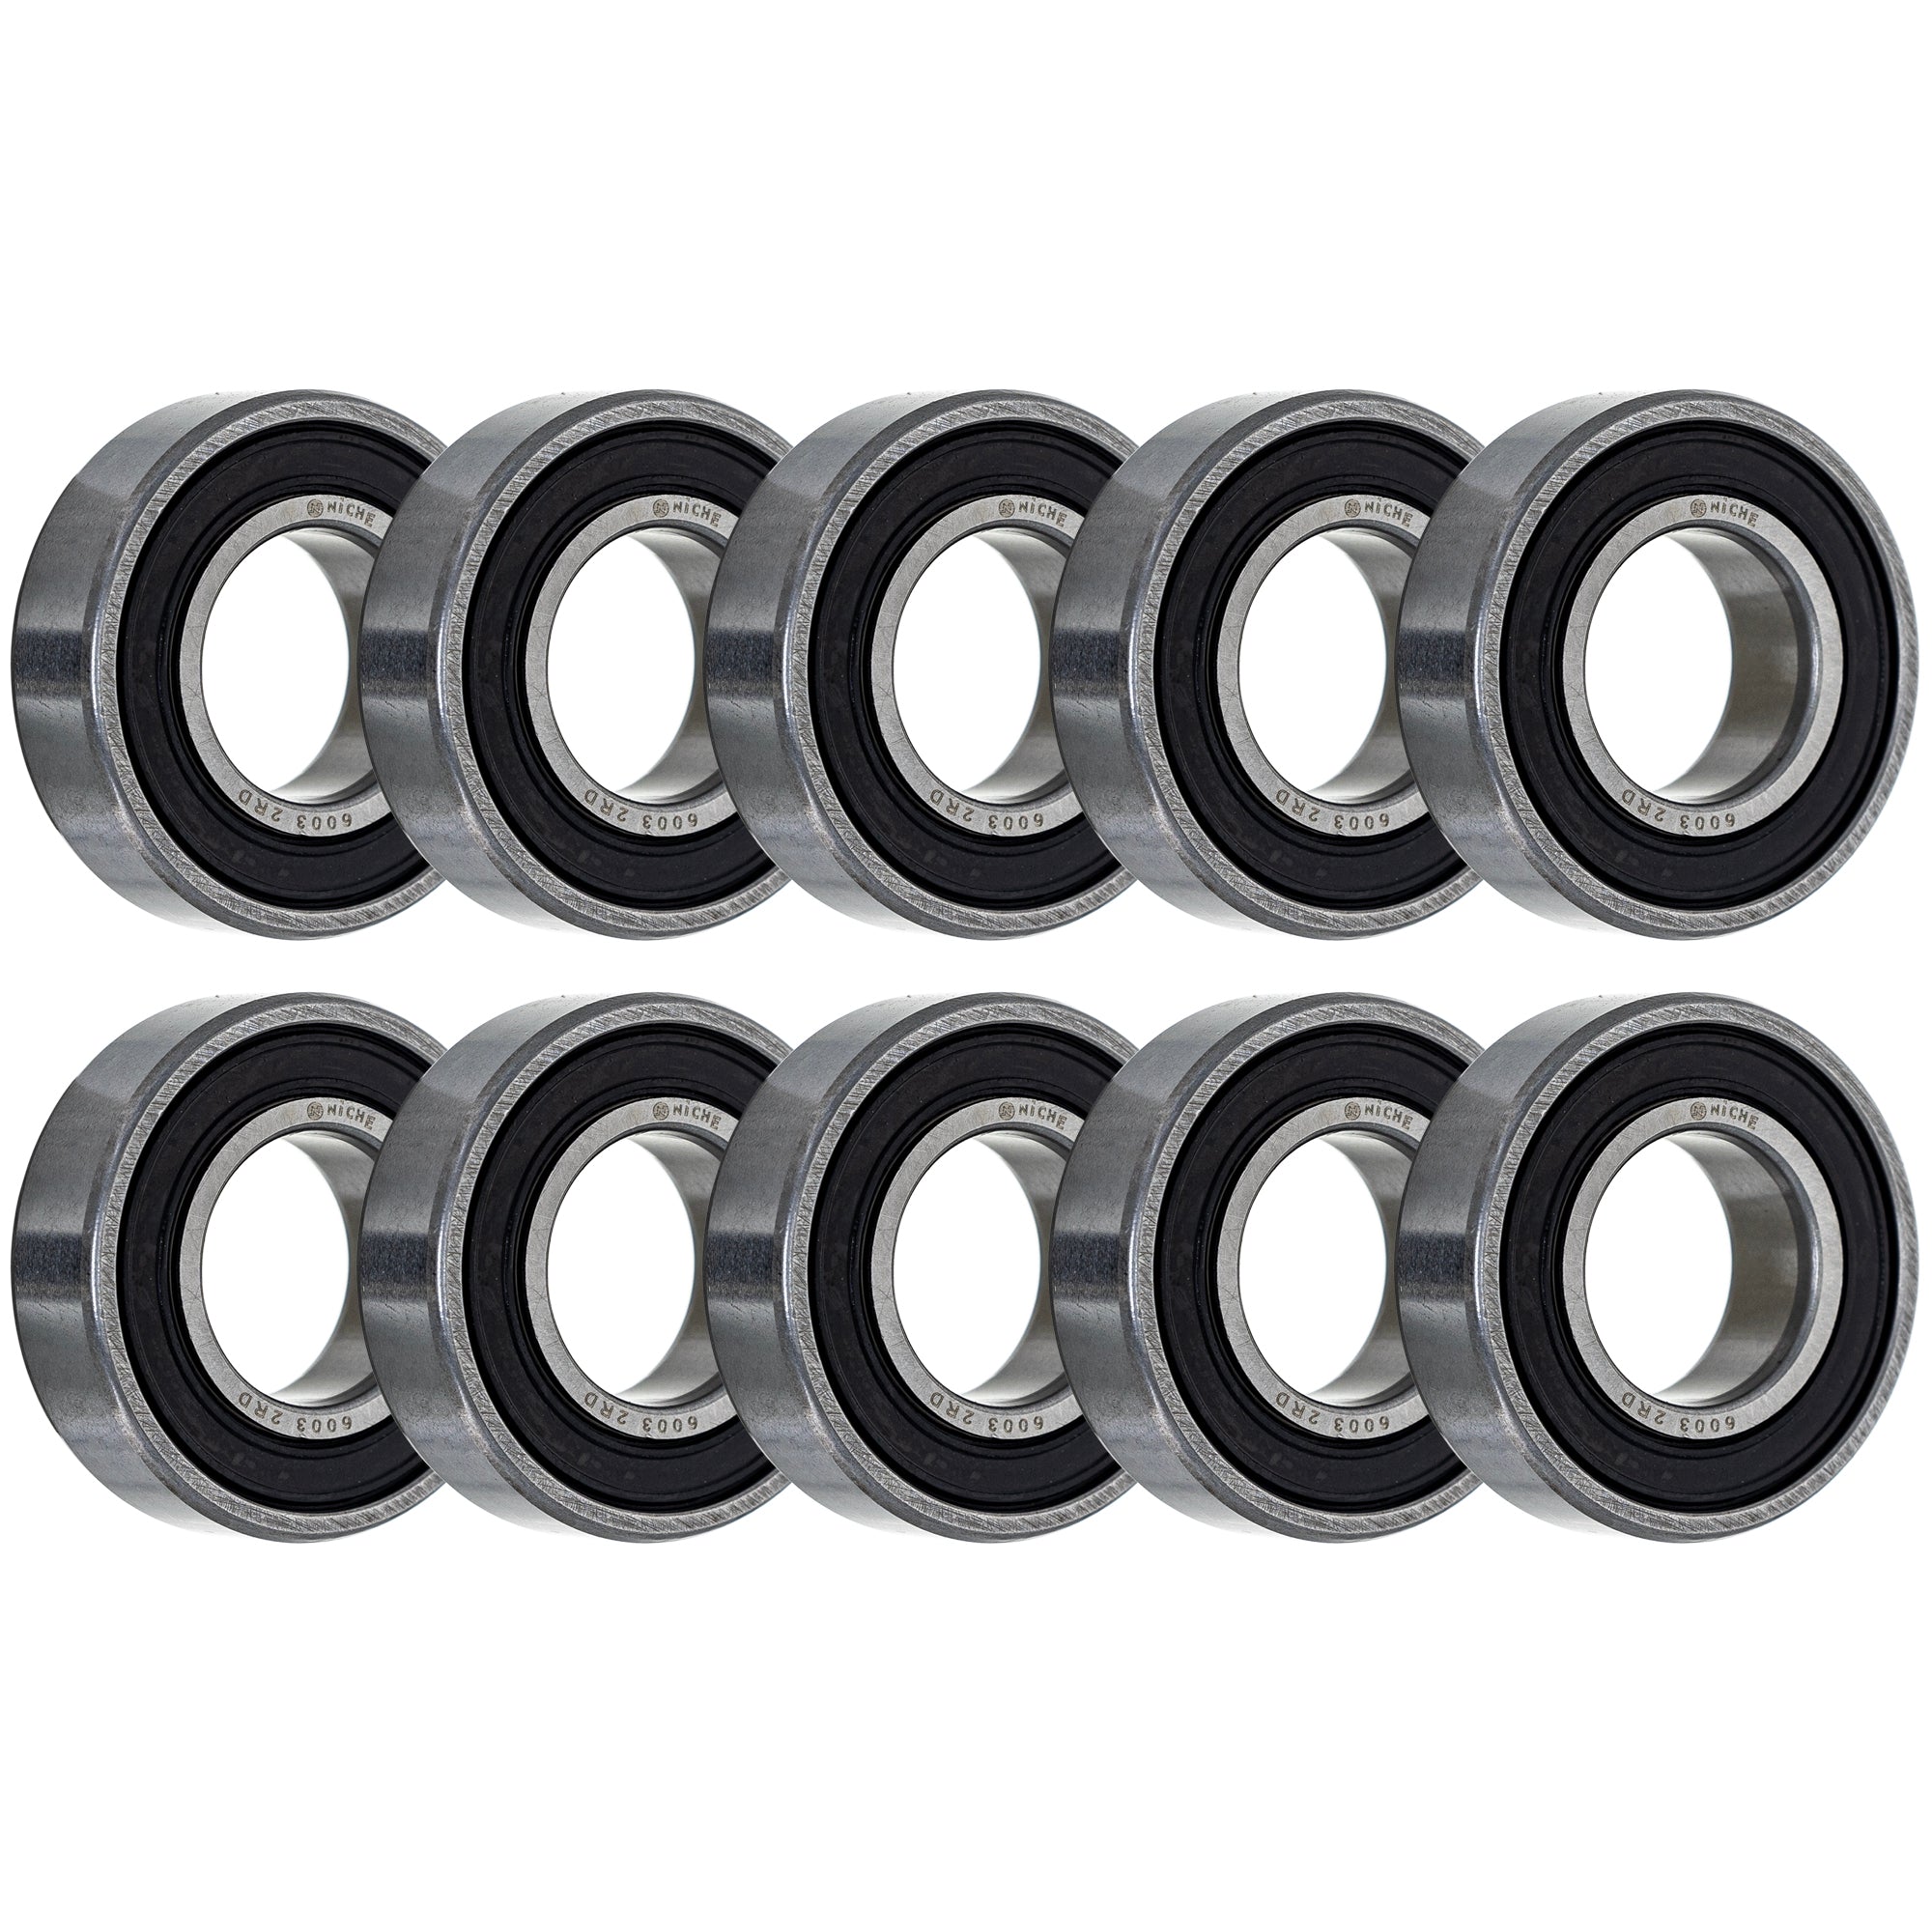 Electric Grade, Single Row, Deep Groove, Ball Bearing Pack of 10 10-Pack for zOTHER YFZ50 NICHE 519-CBB2276R